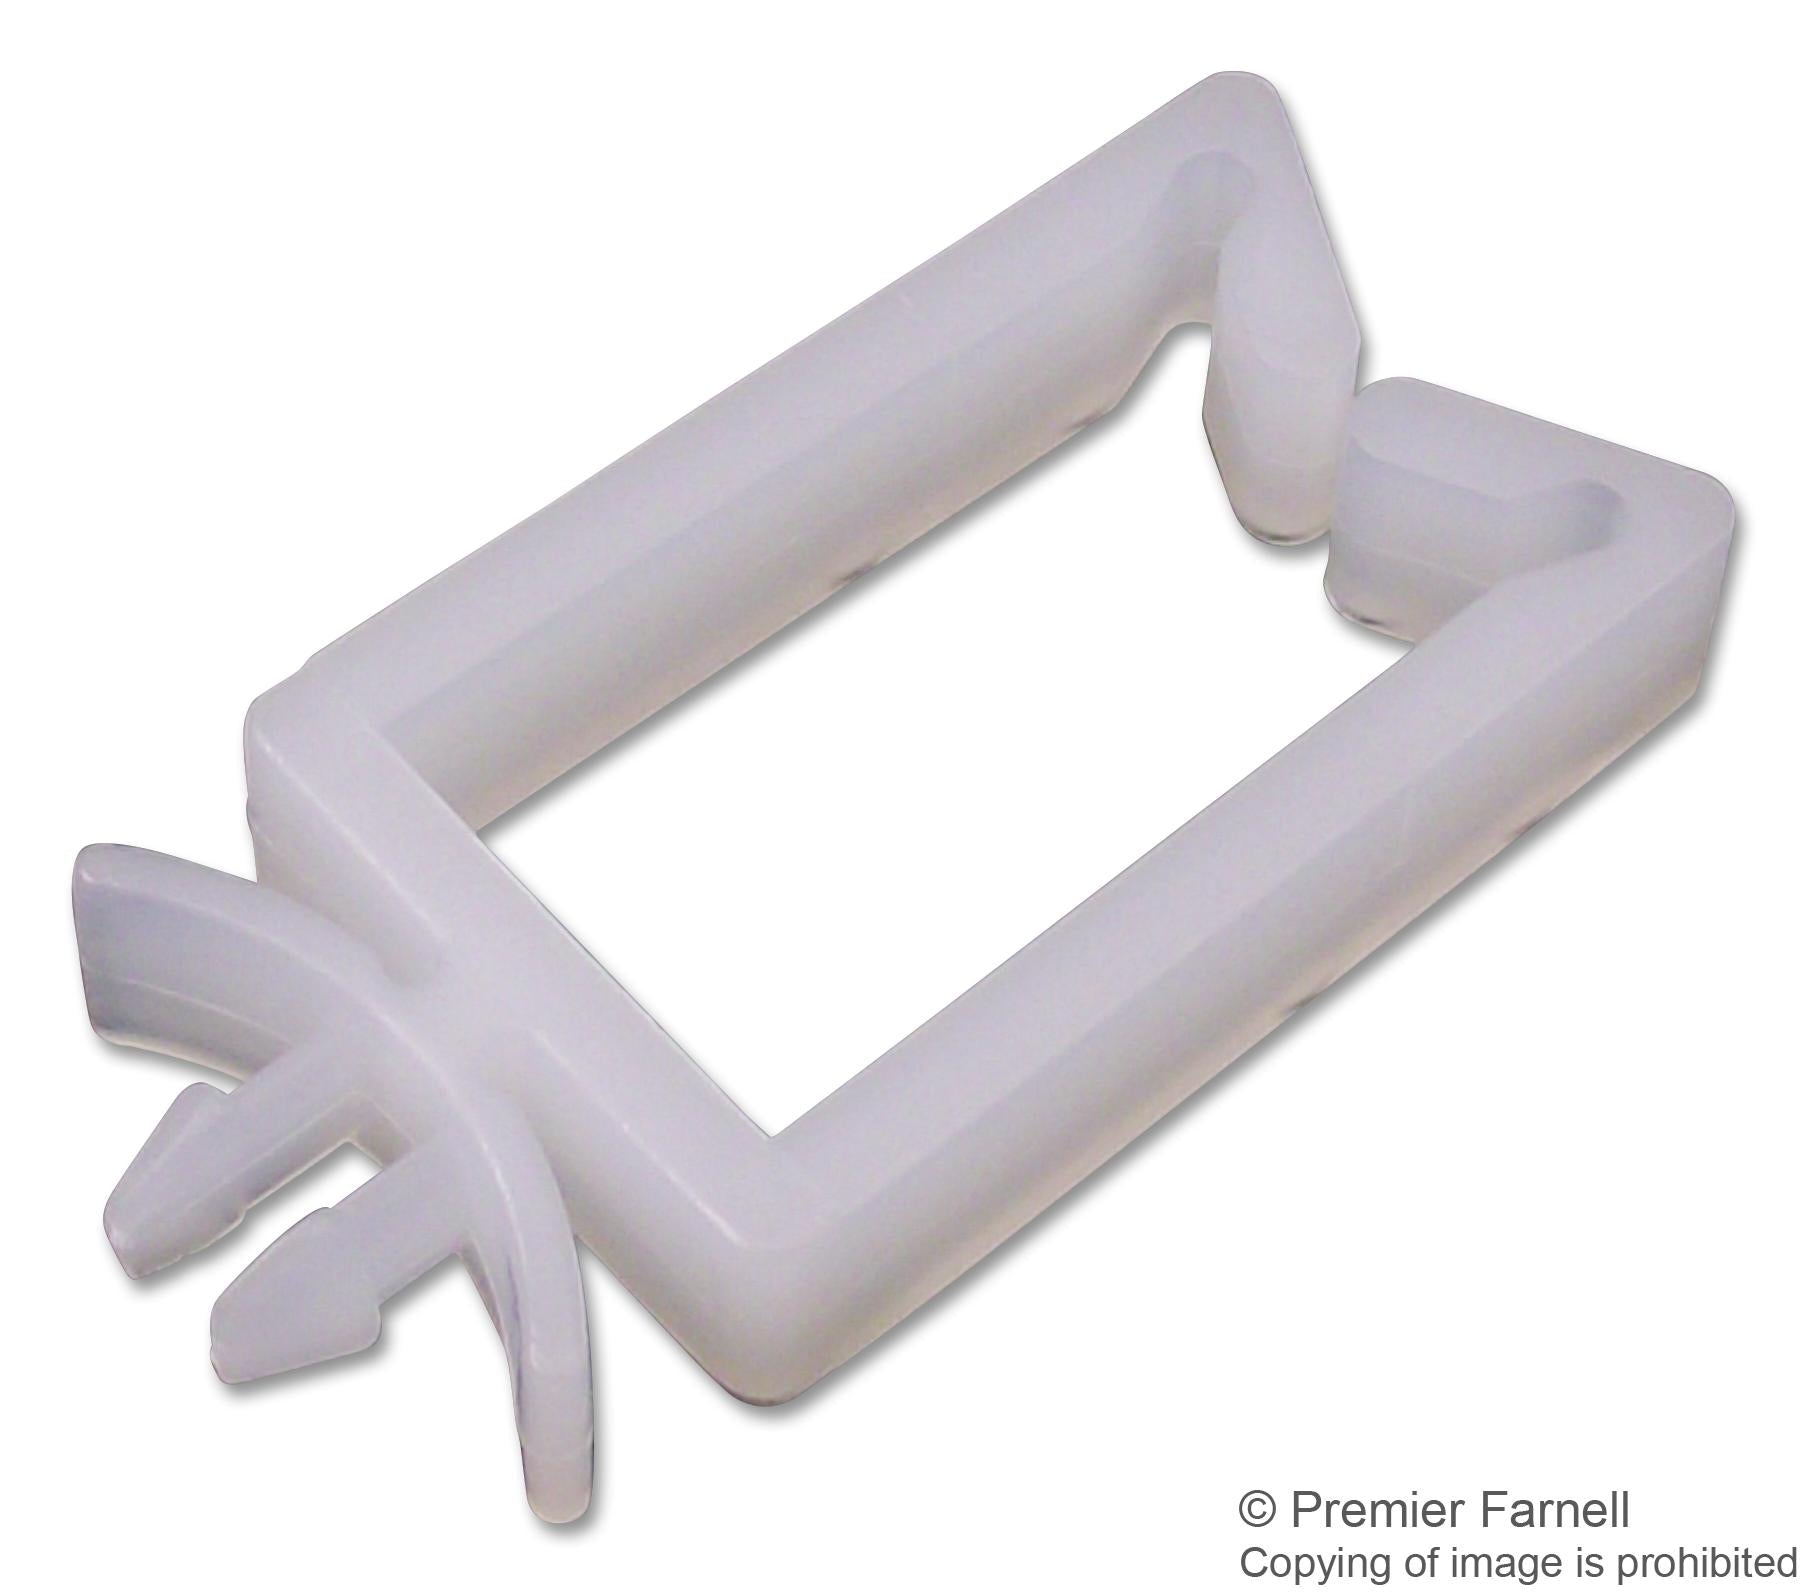 TRWS-A-1-01 CABLE CLAMP, NYLON 6.6, 13MM, PK50 TR FASTENINGS